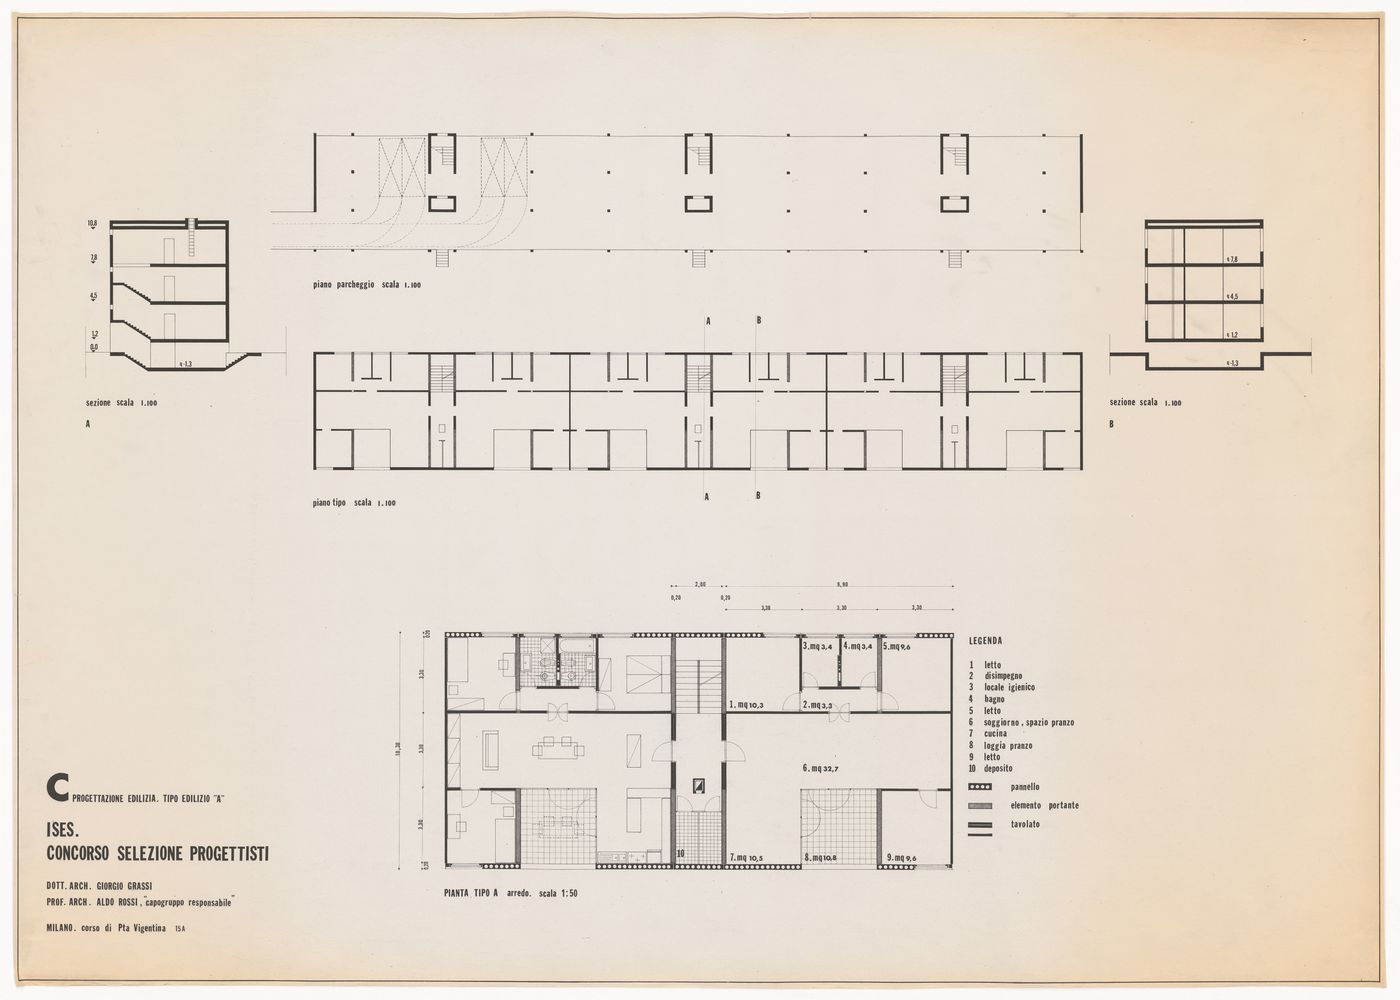 Plans and sections for Quartiere residenziale a Napoli, Naples, Italy